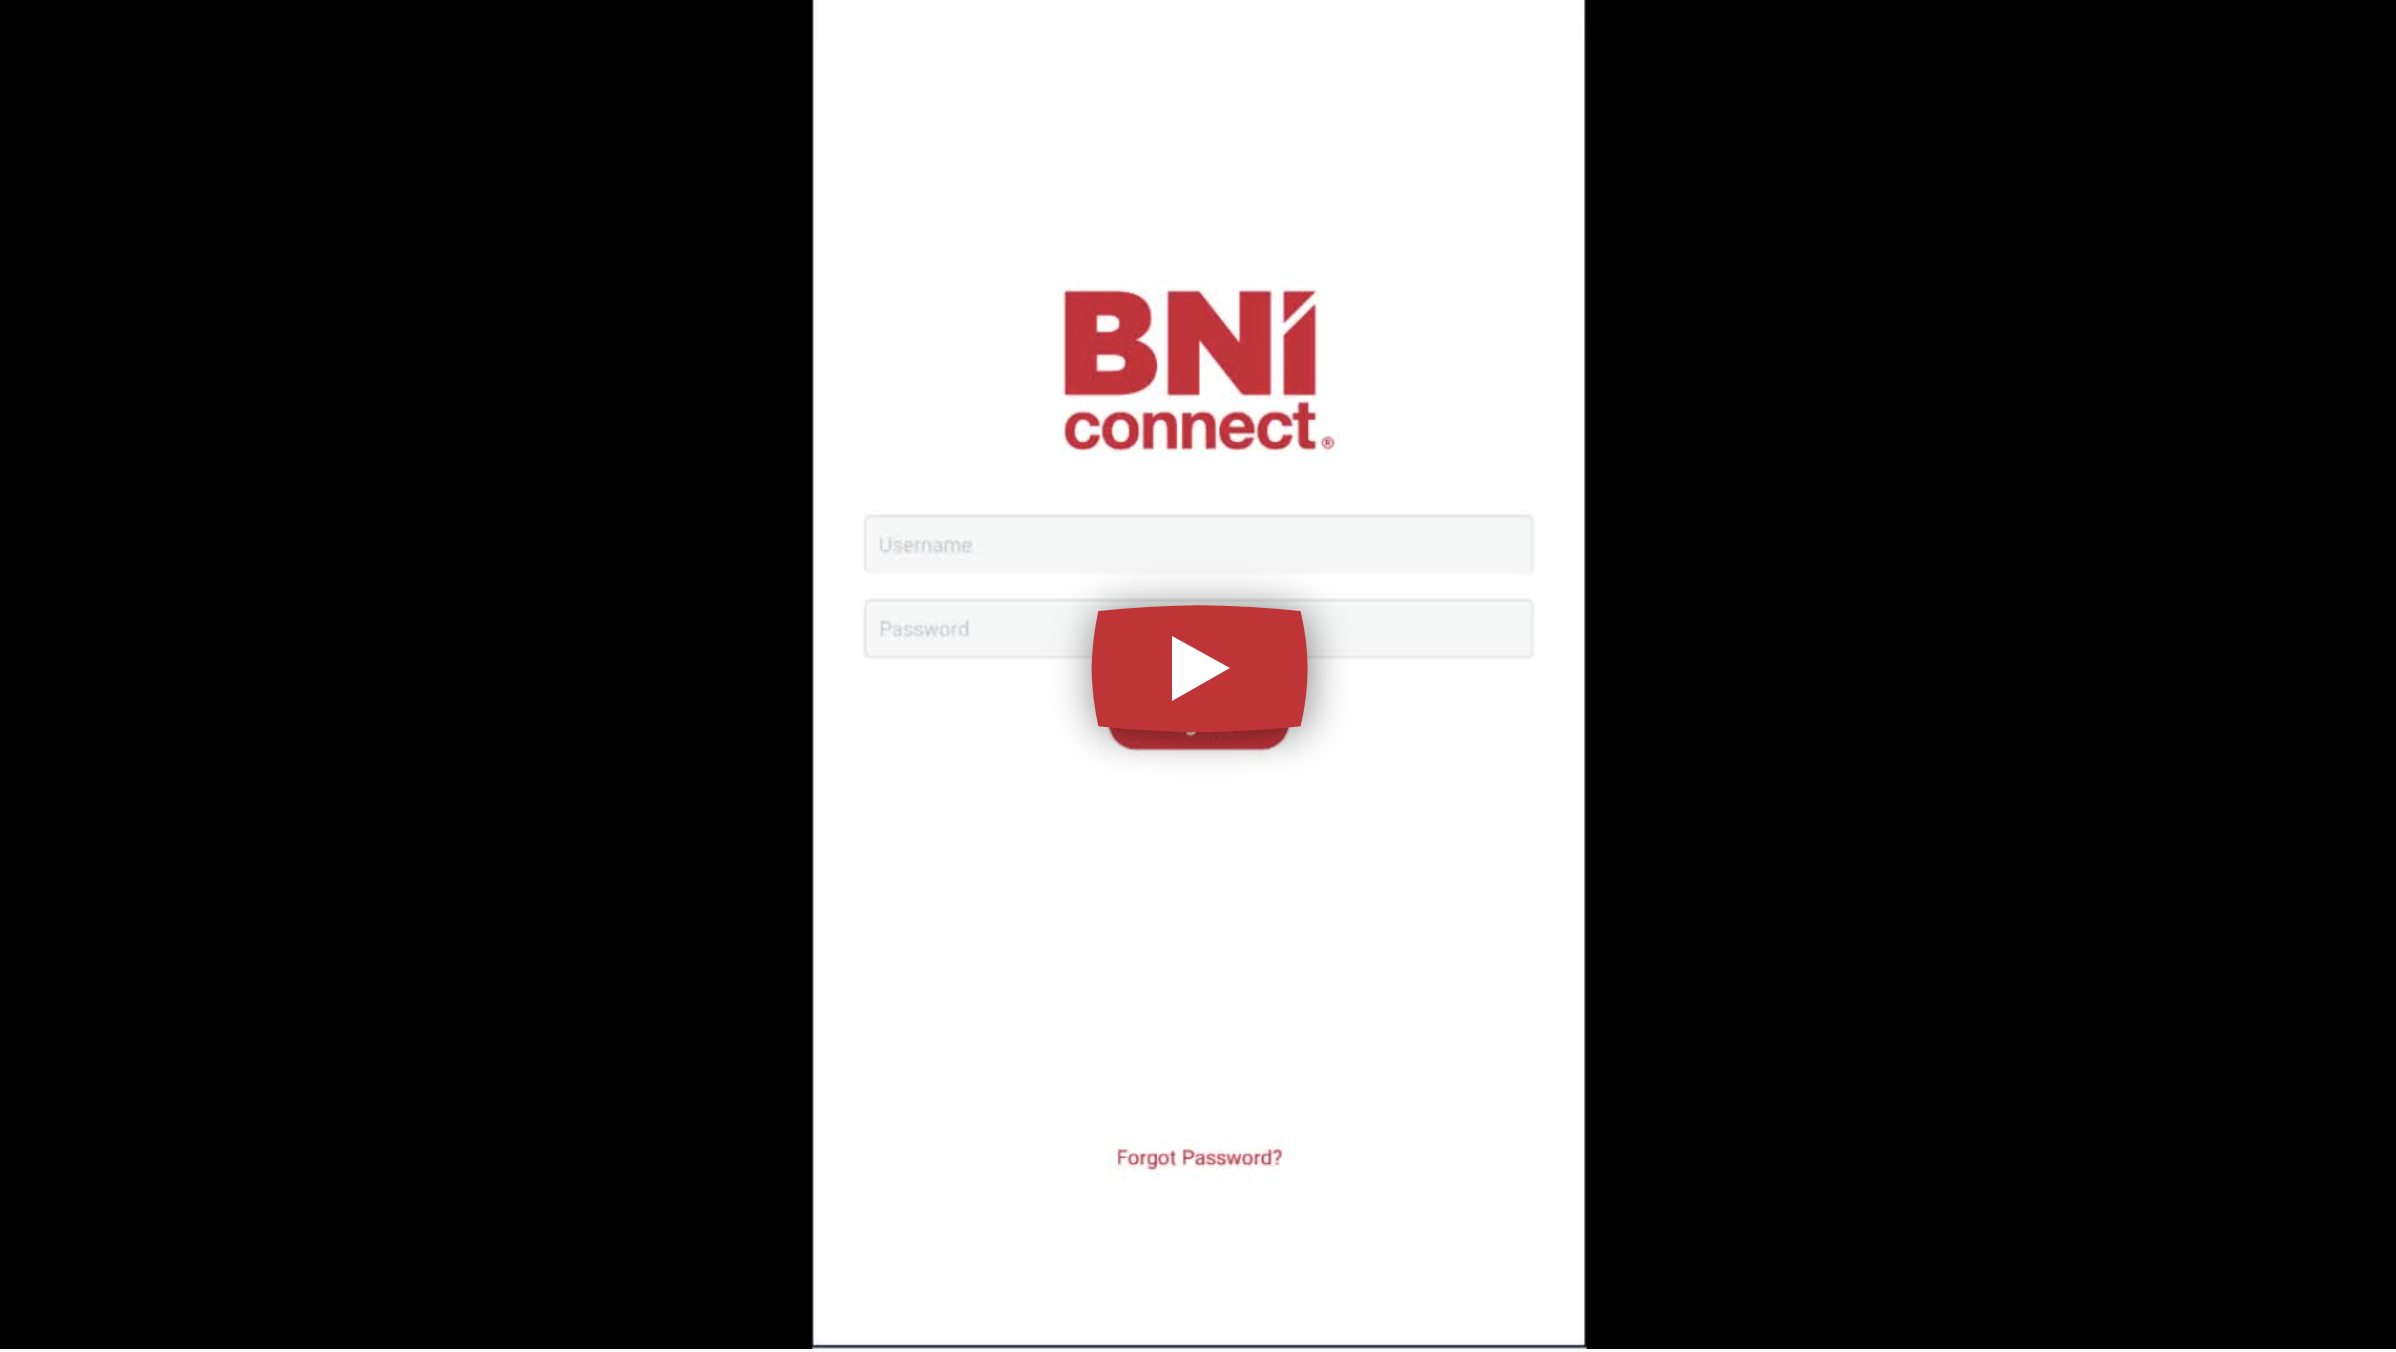 Exploring the BNI Connect Mobile App